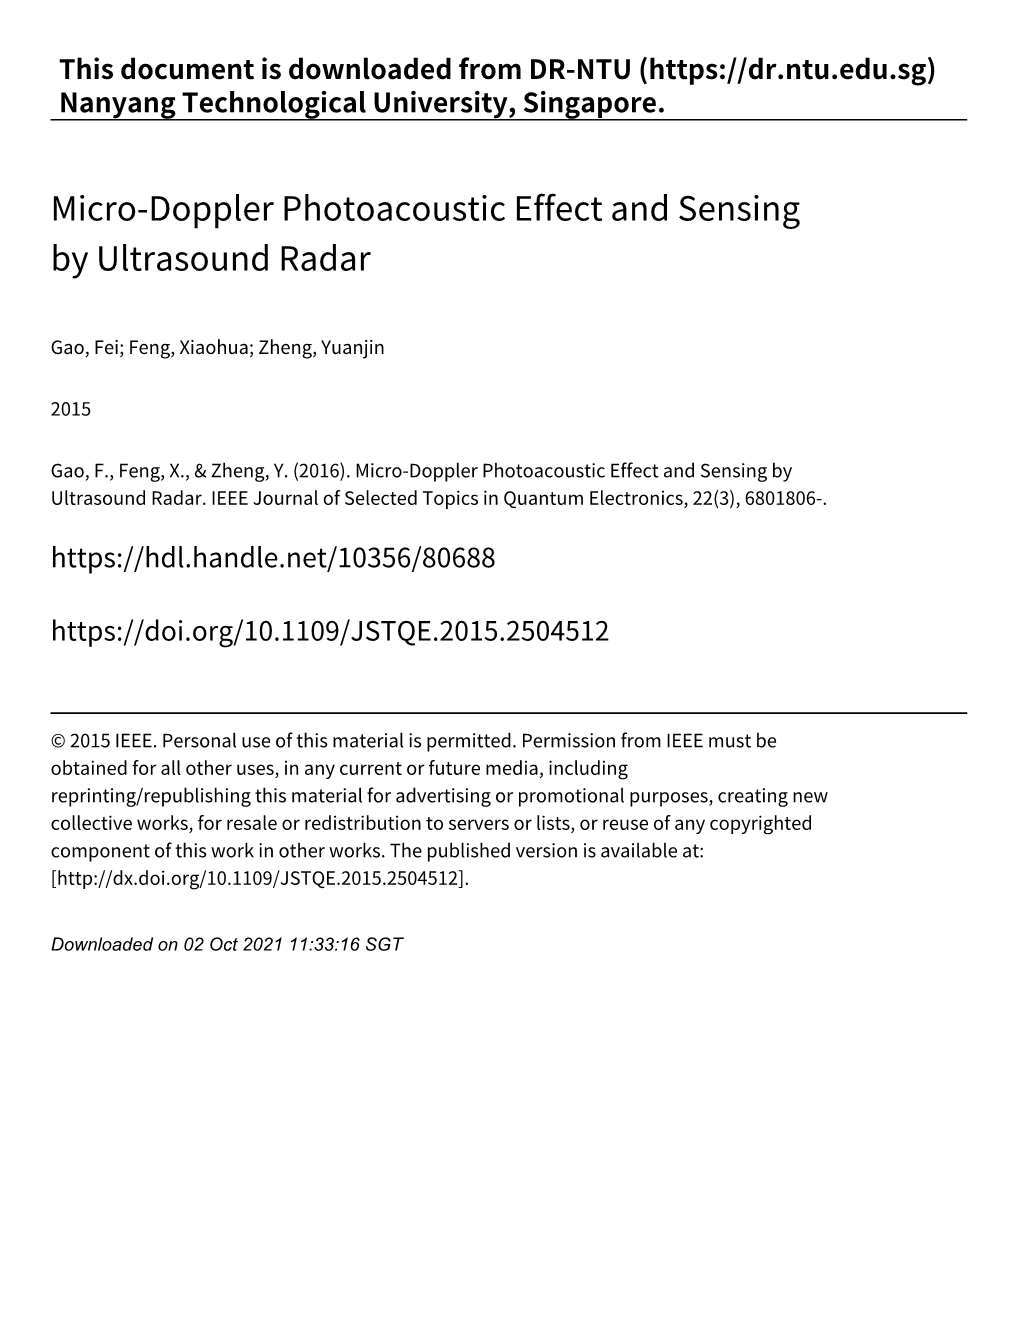 Micro‑Doppler Photoacoustic Effect and Sensing by Ultrasound Radar